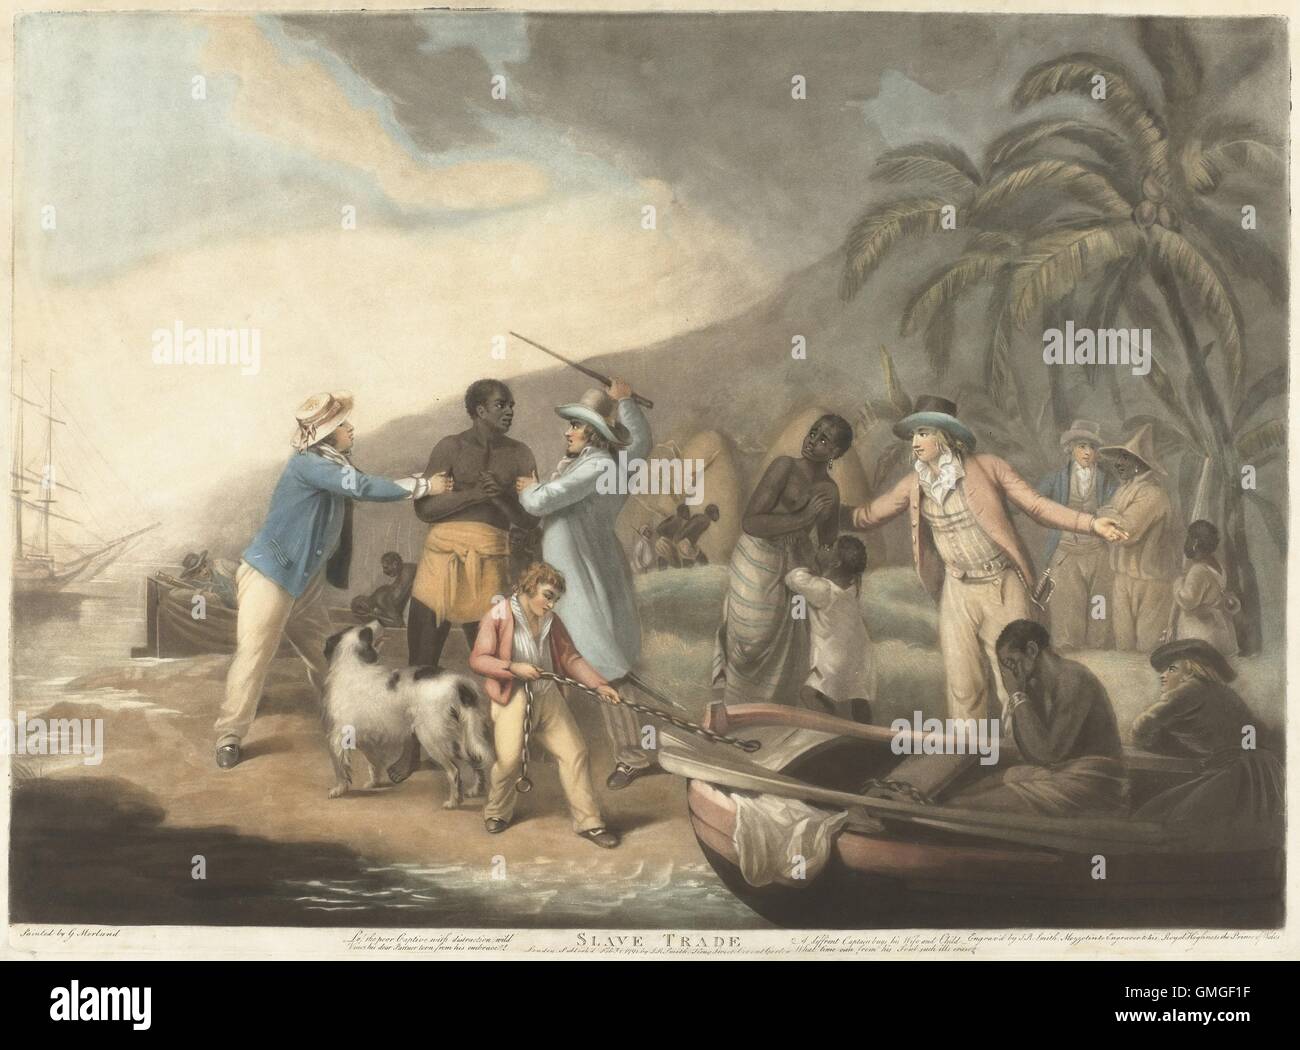 Slave Trade, by John Raphael Smith, after George Morland, 1762-12, British print. The print's caption reads: Lo the poor Captive with distraction wild, Views his dear Partner torn from his embrace; A different Captain buys his Wife and Child, What time ca (BSLOC 2016 6 310) Stock Photo